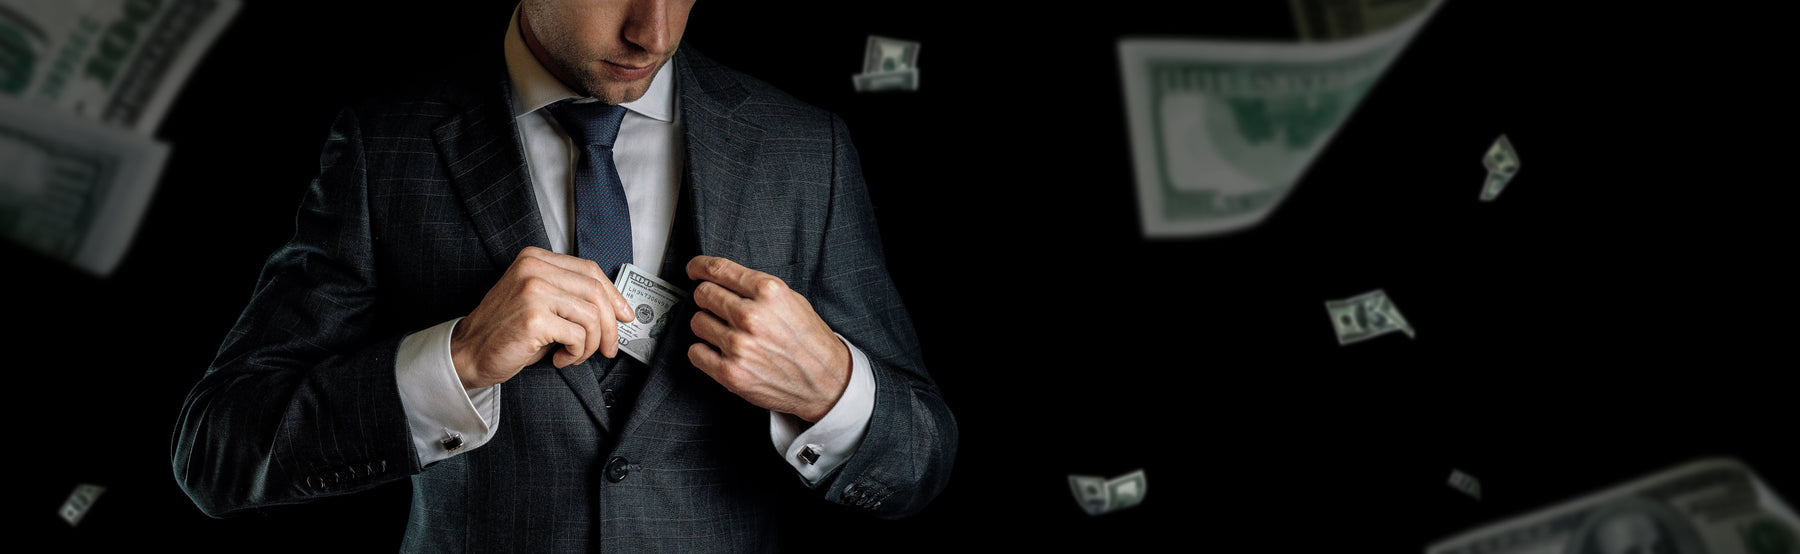 a mysterious man in a suit placing a wad of $100 bills in his inside pocket